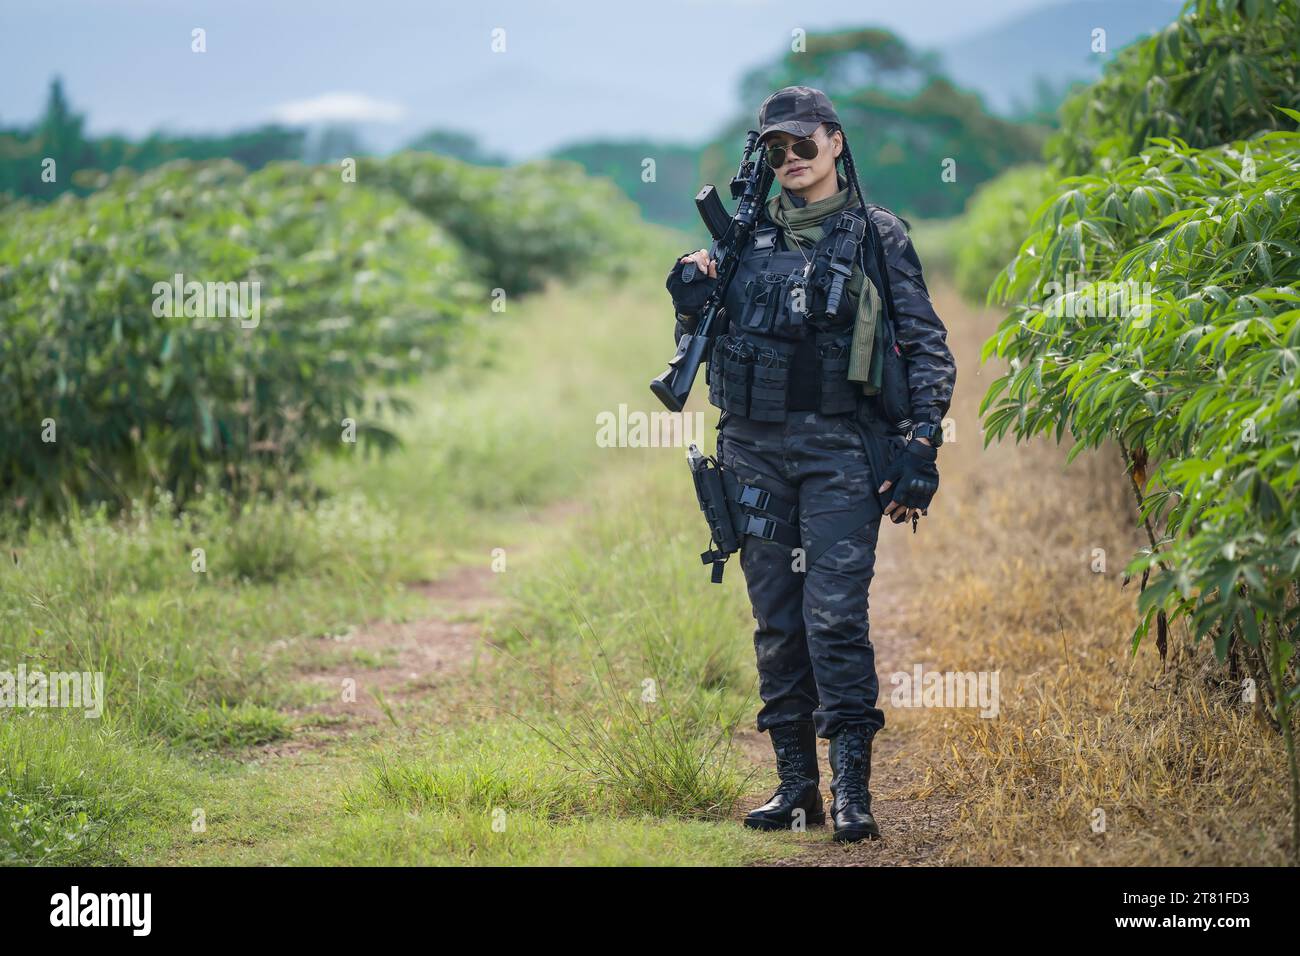 A military soldier stands ready for action with an assault rifle in hand, surrounded by lush shrubbery in the background Stock Photo